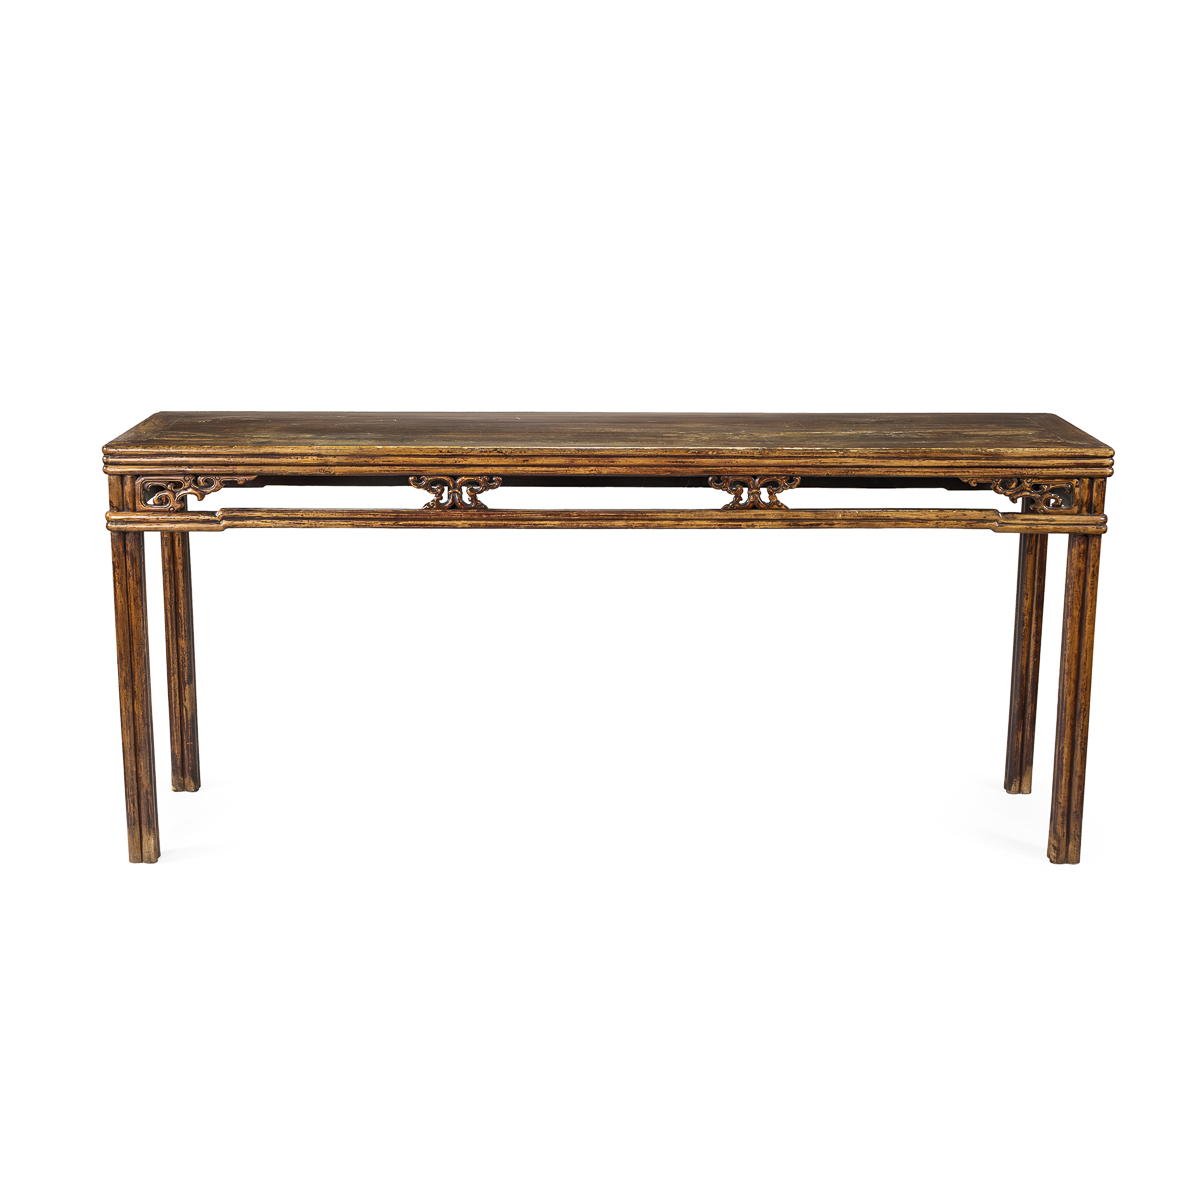 Oriental style console